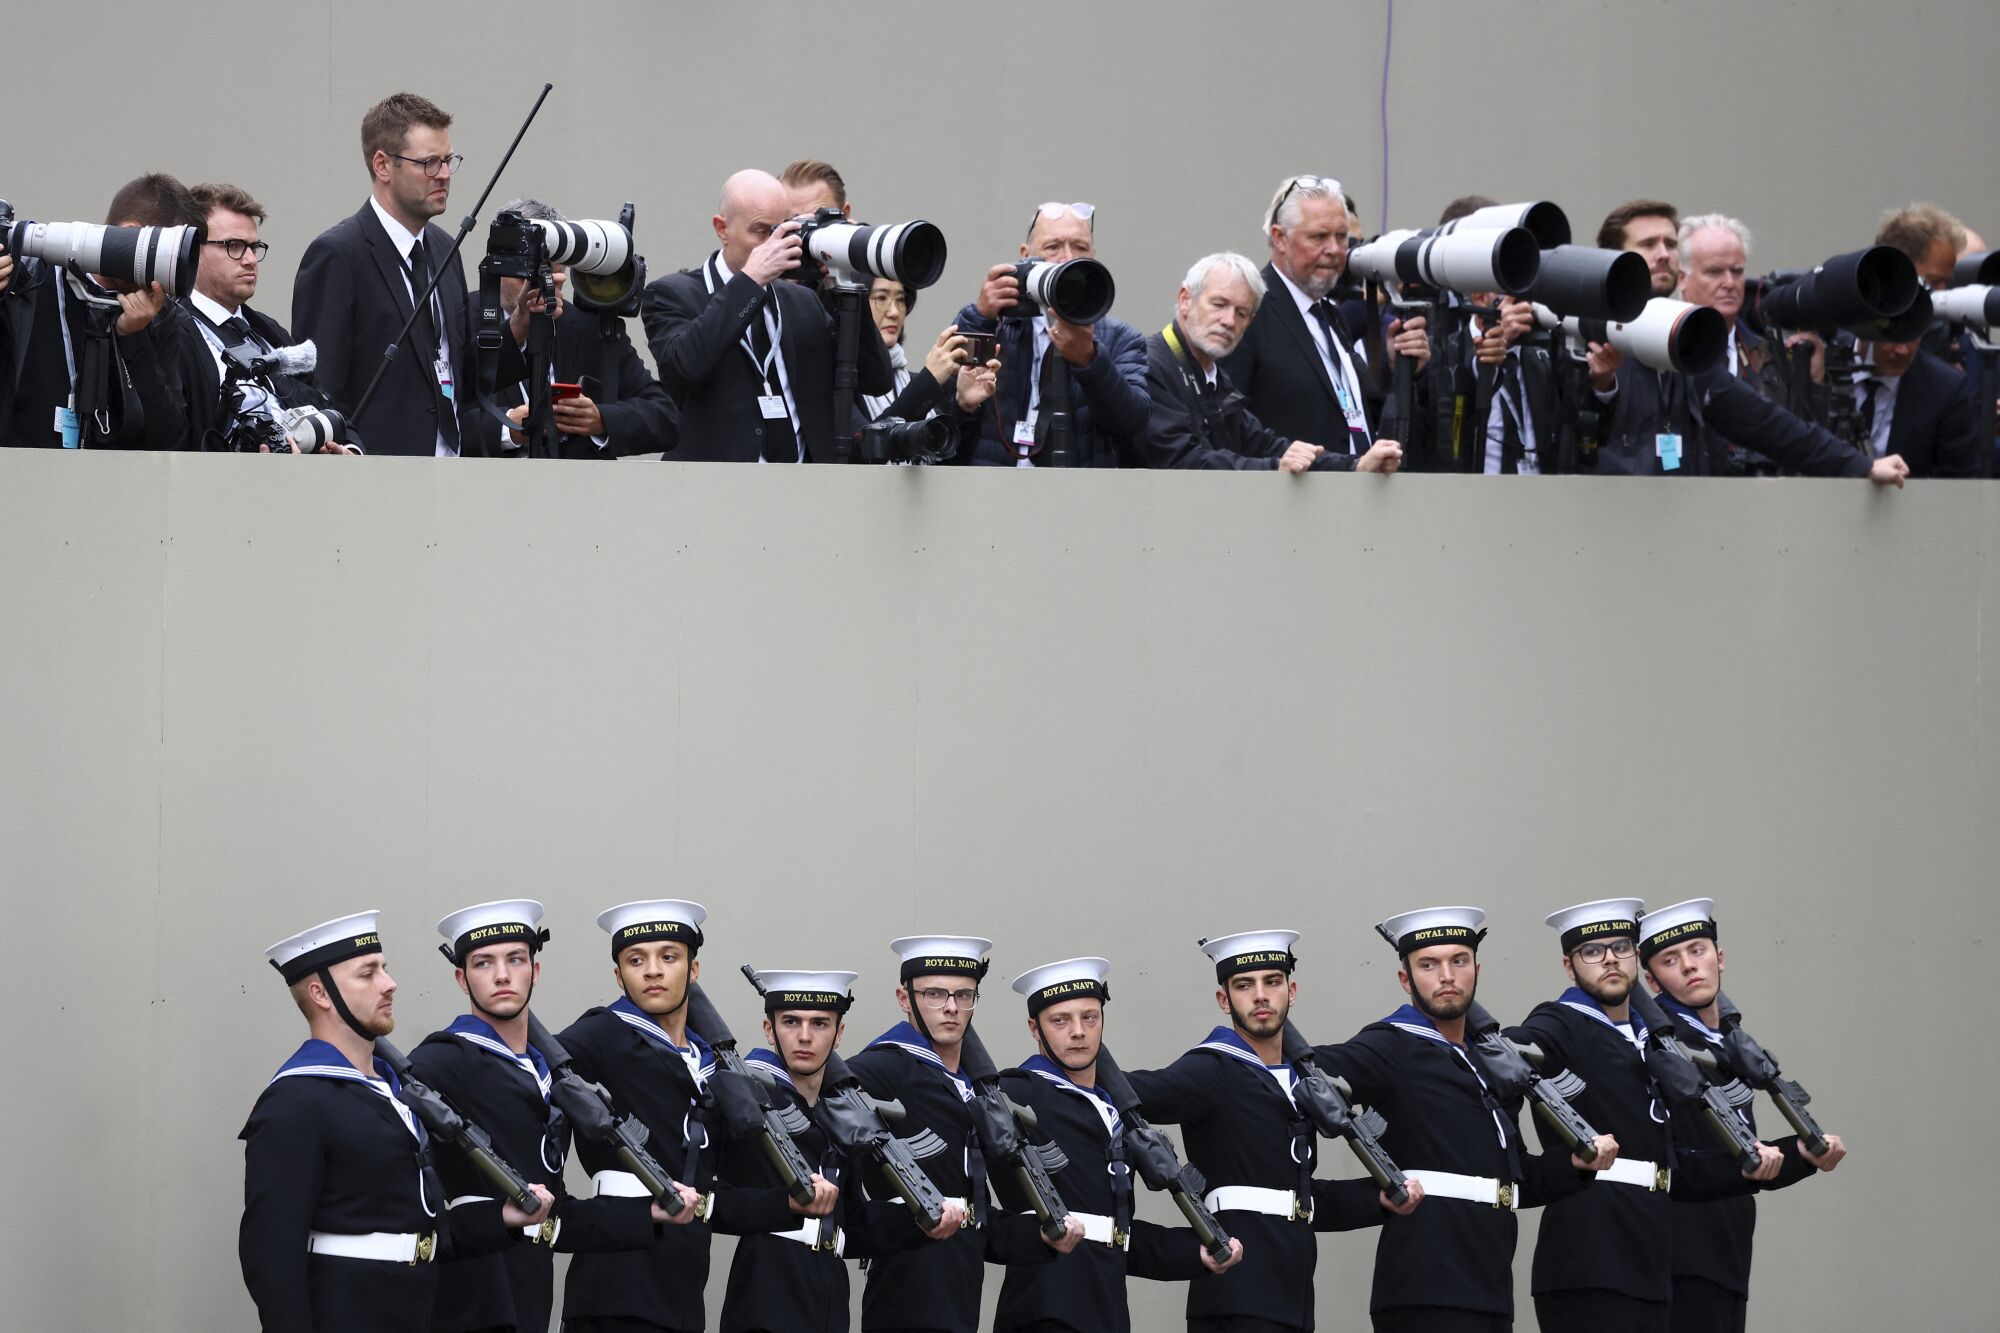 Members of the Royal Navy stand underneath row of phtoographers. 